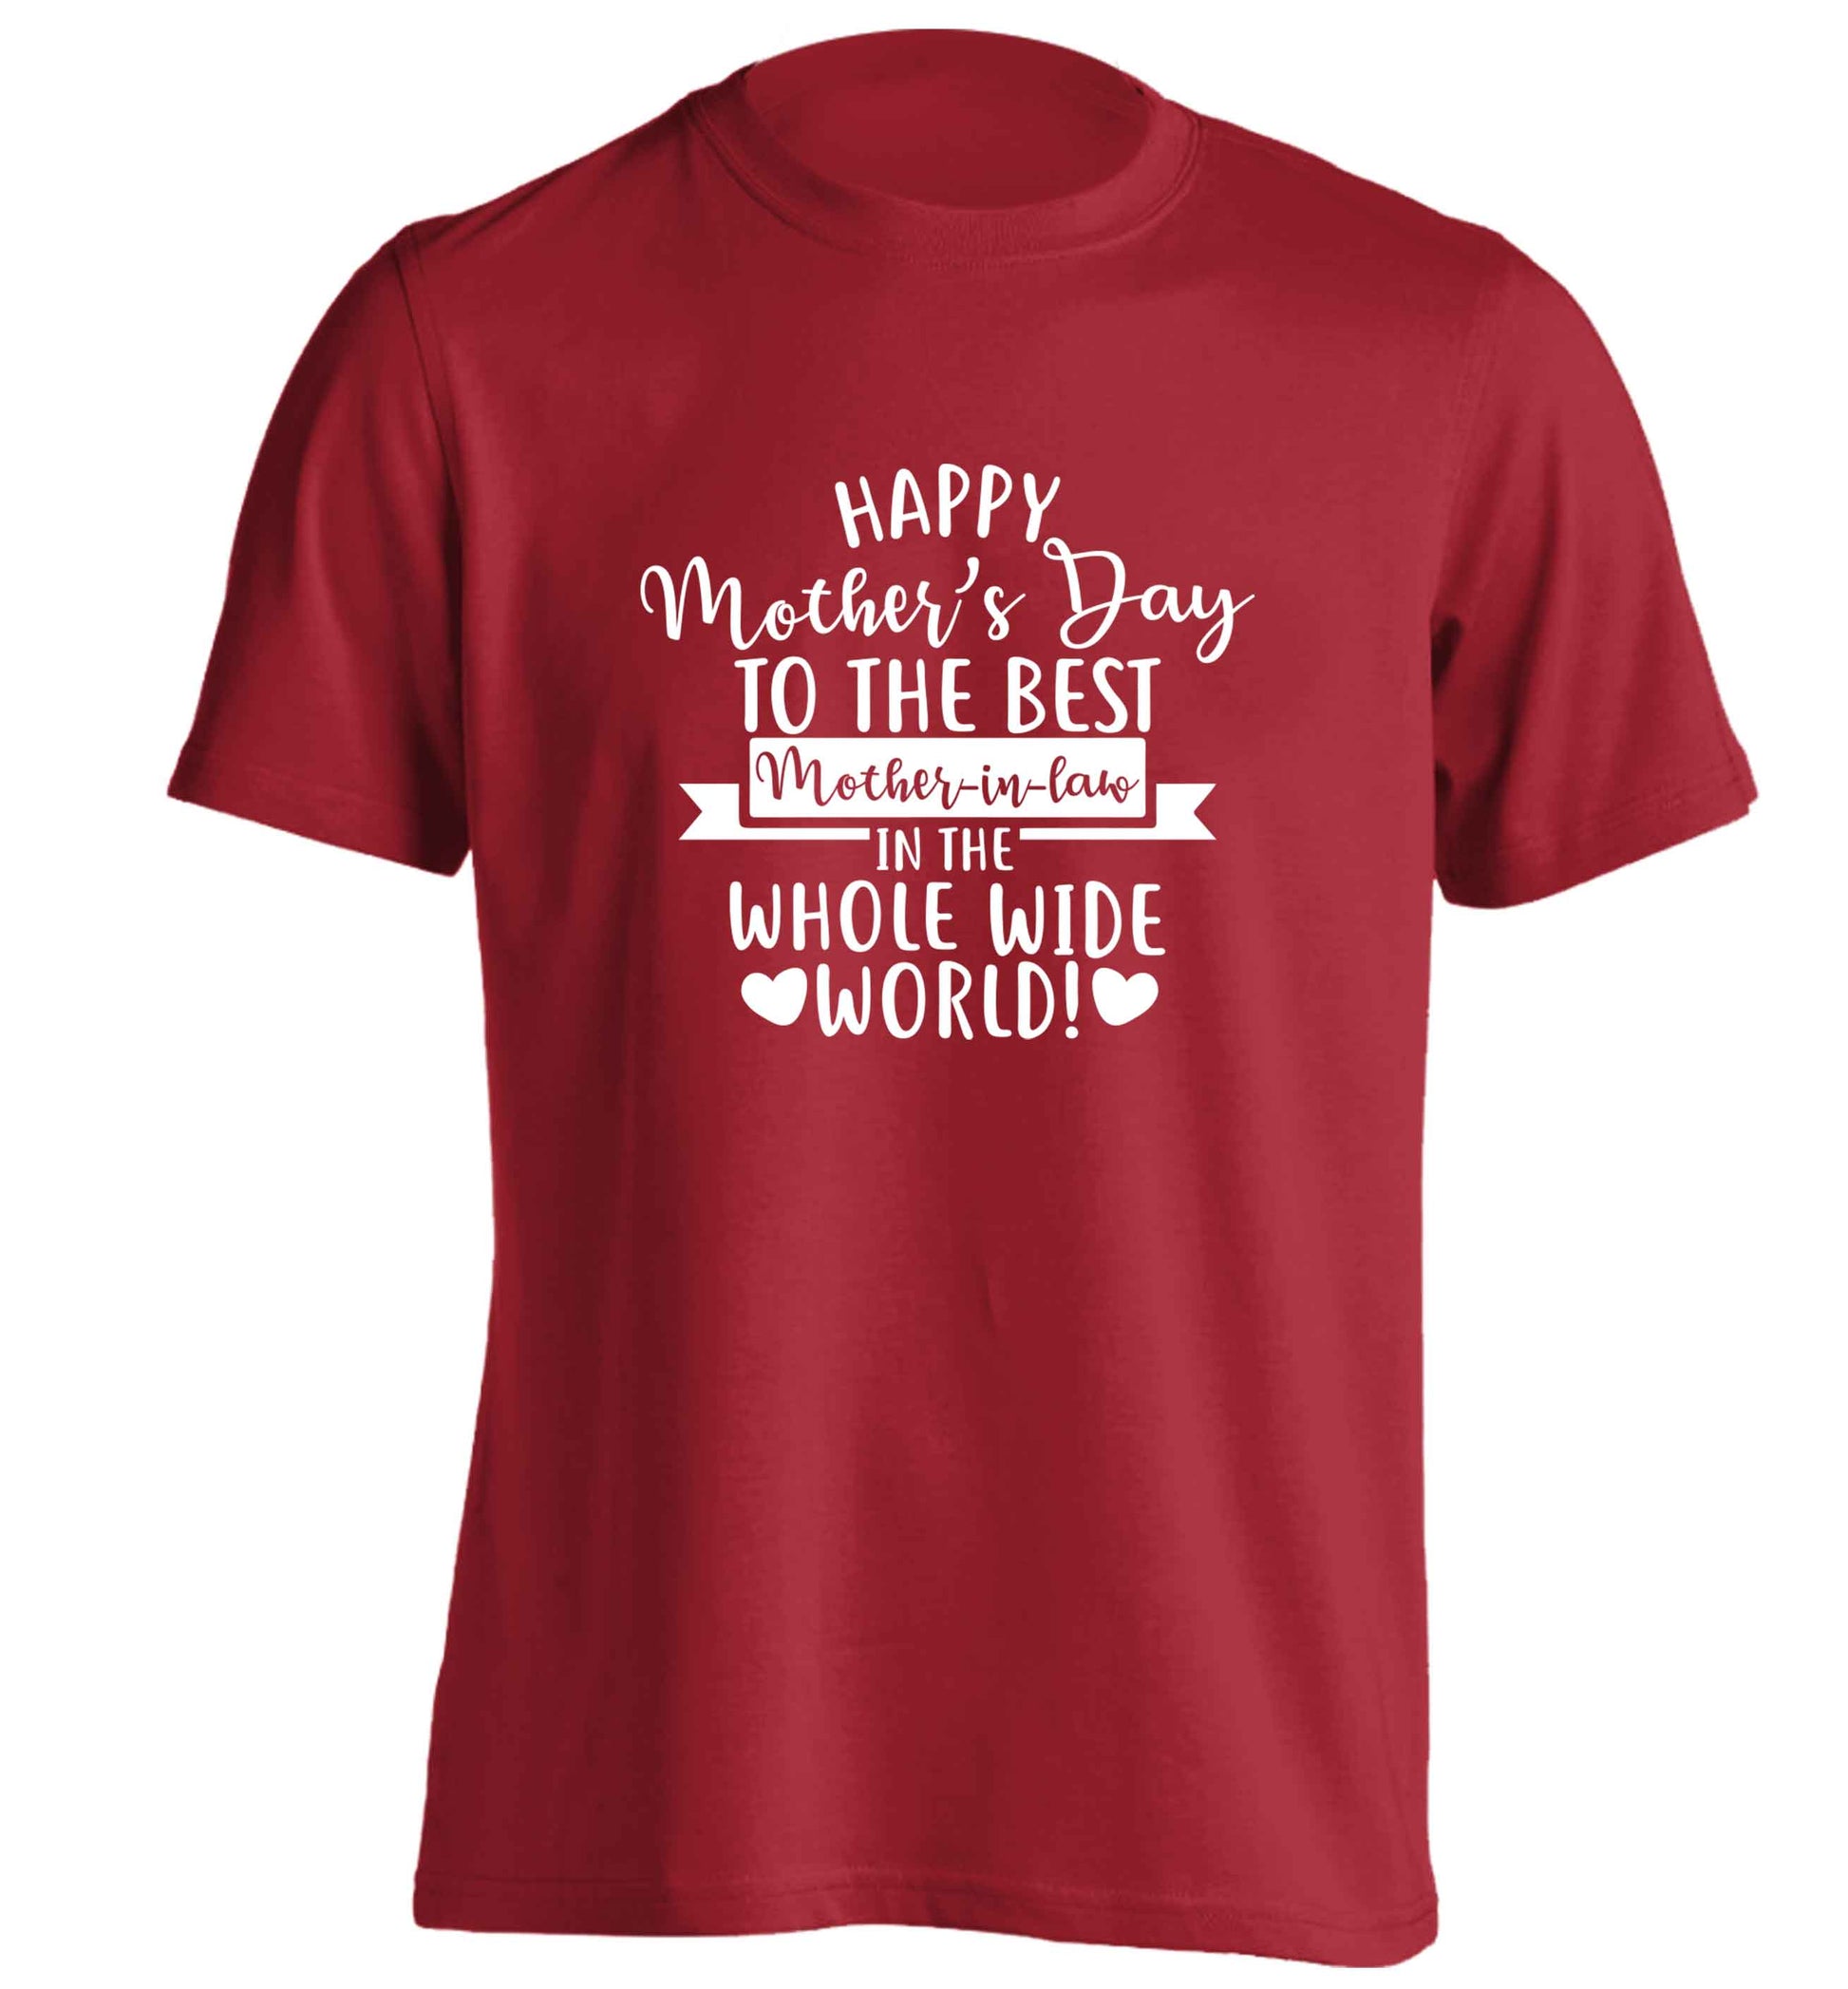 Happy mother's day to the best mother-in law in the world adults unisex red Tshirt 2XL